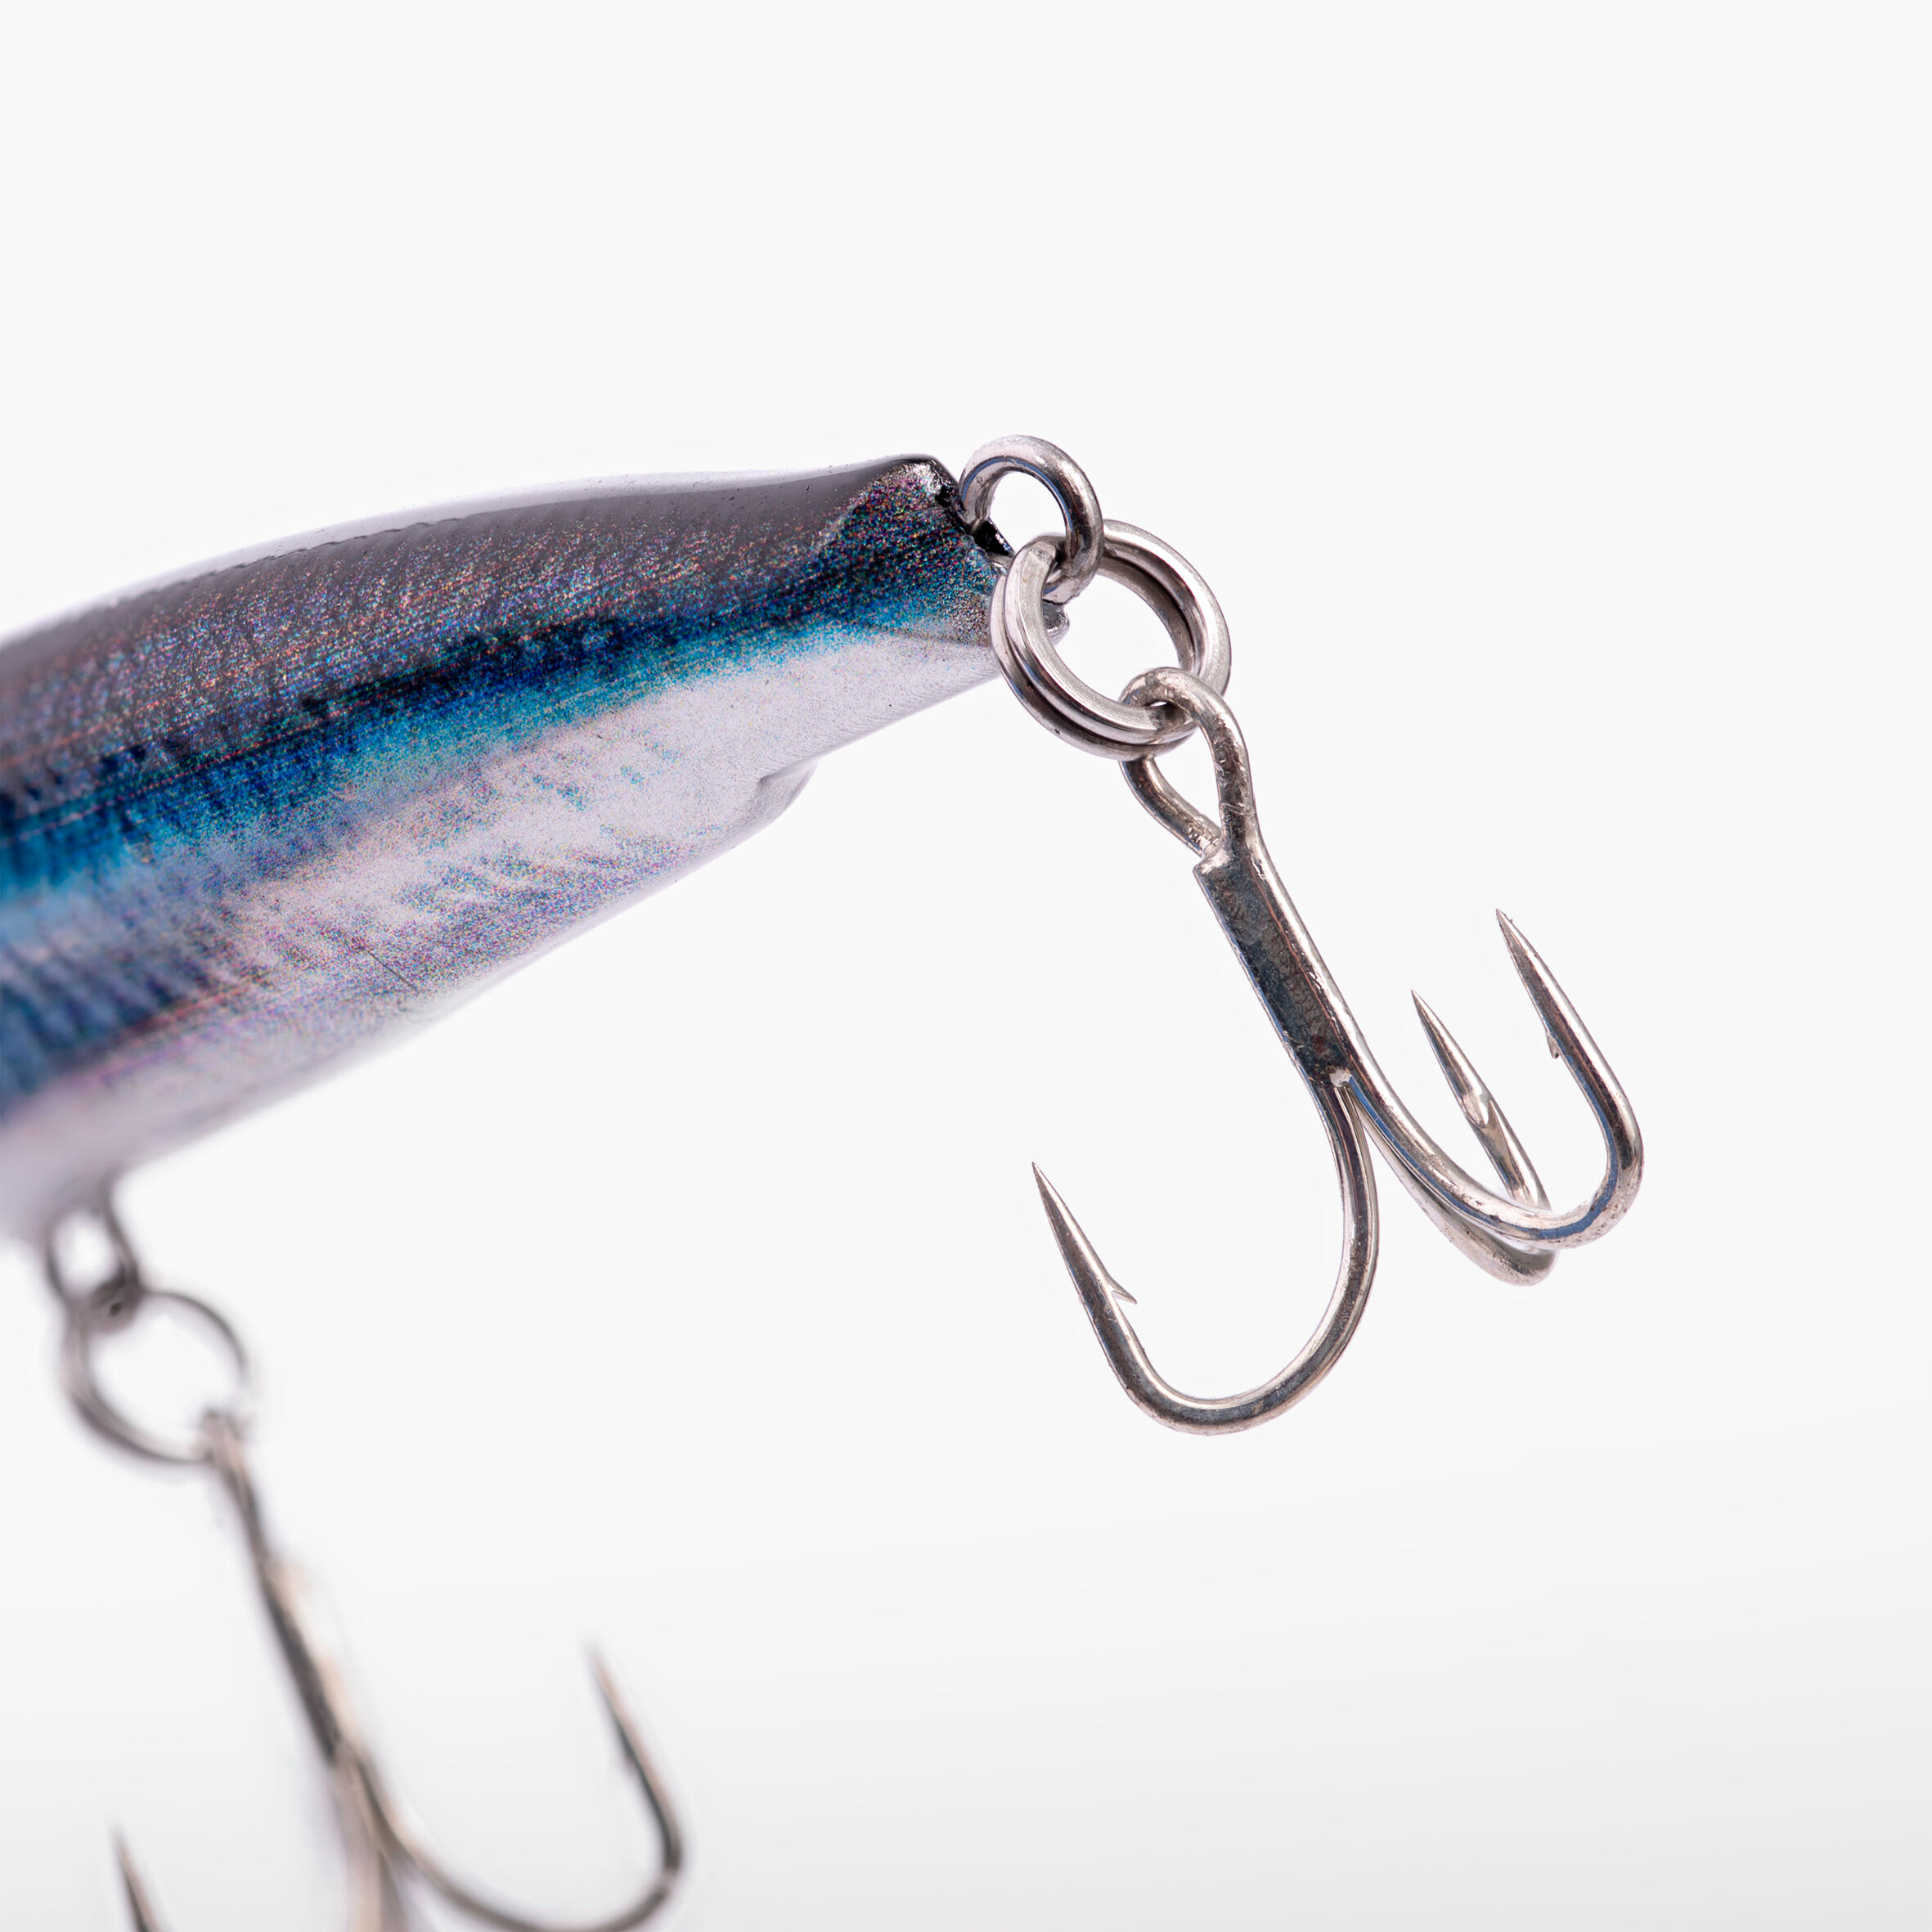 Plug Bait lipless minnow ANCHO LM 60 Anchovy 5/5